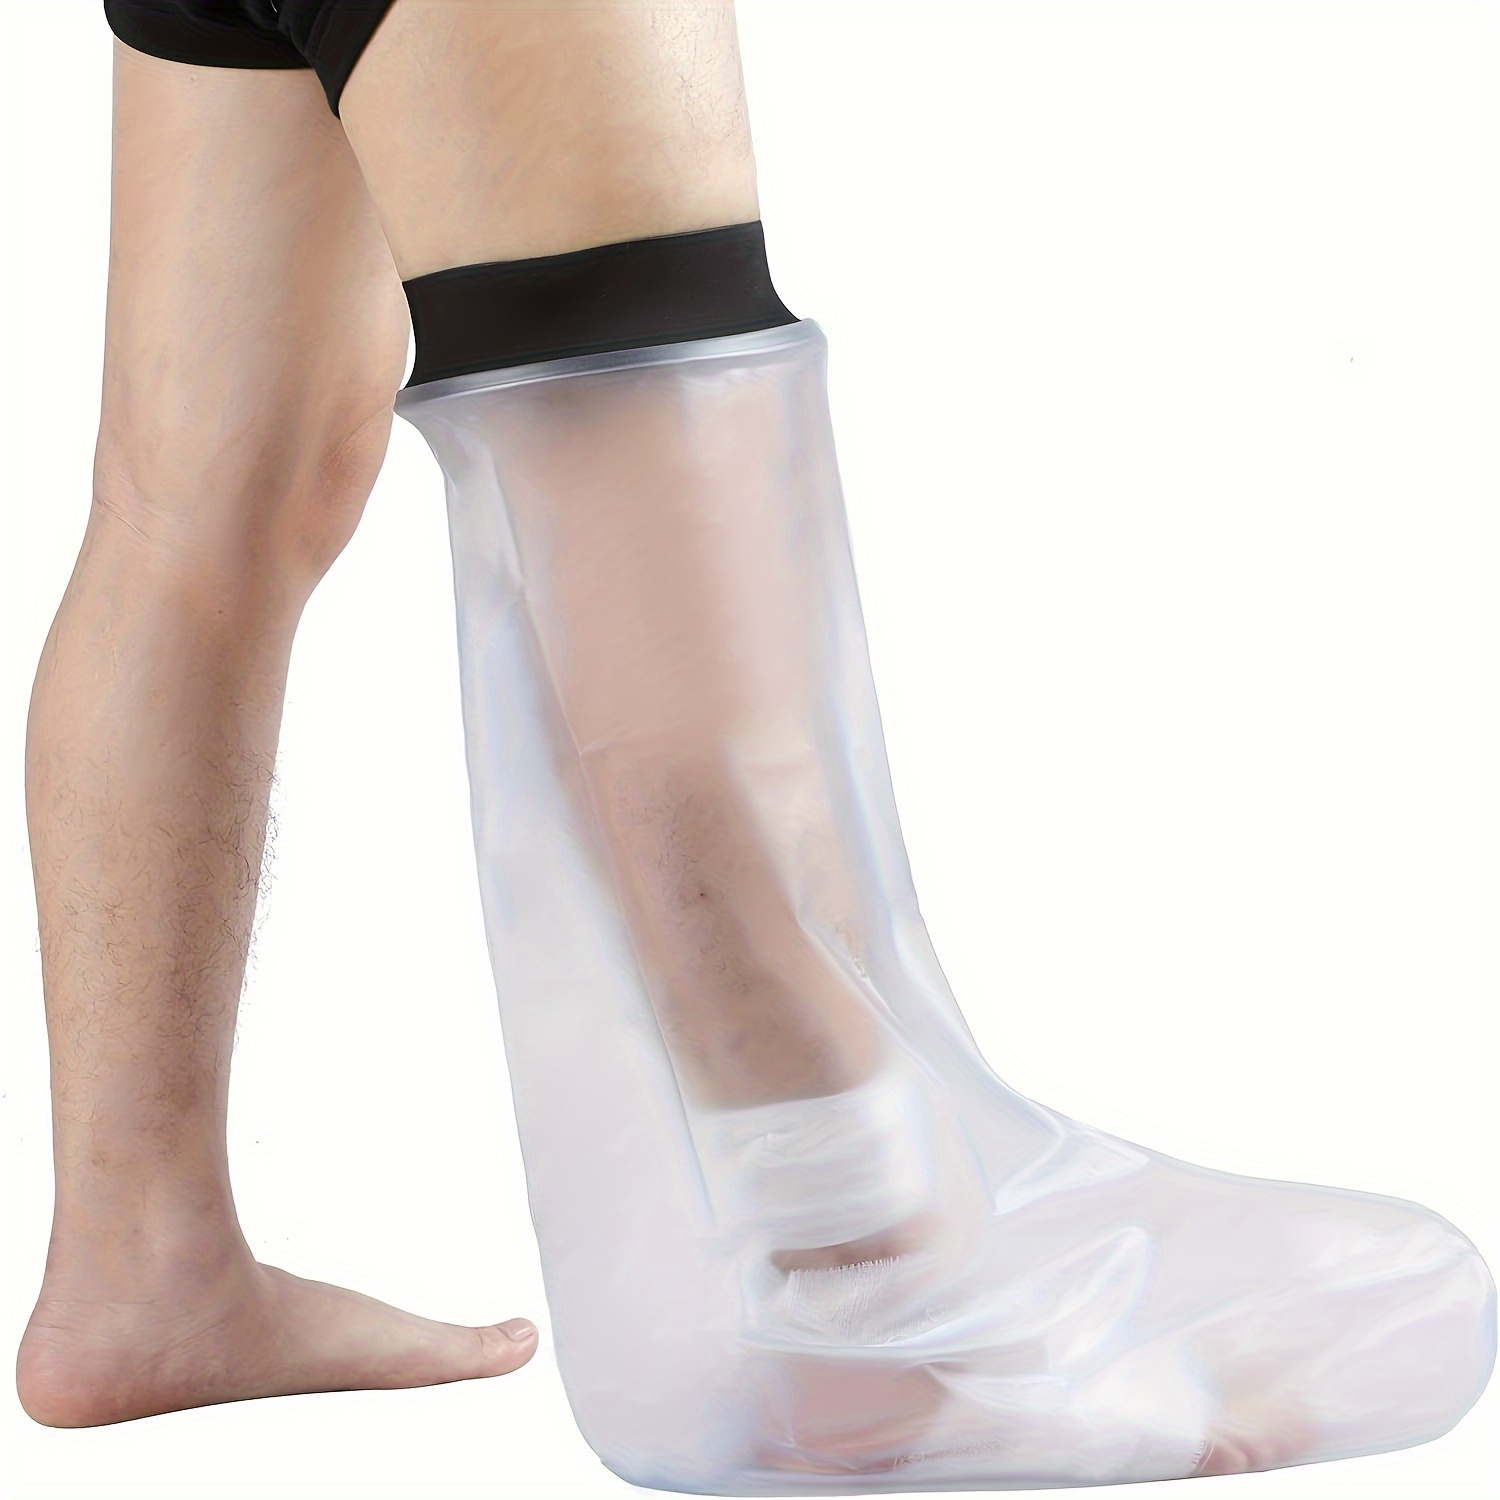 

Hkf Ho Ki Ho 1pc Adult Short Waterproof Leg Cast Cover Designed To Protect Wound Dressings Injuries During Shower & Bath-adult Short Leg.upper Leg 25.98*17.1inch